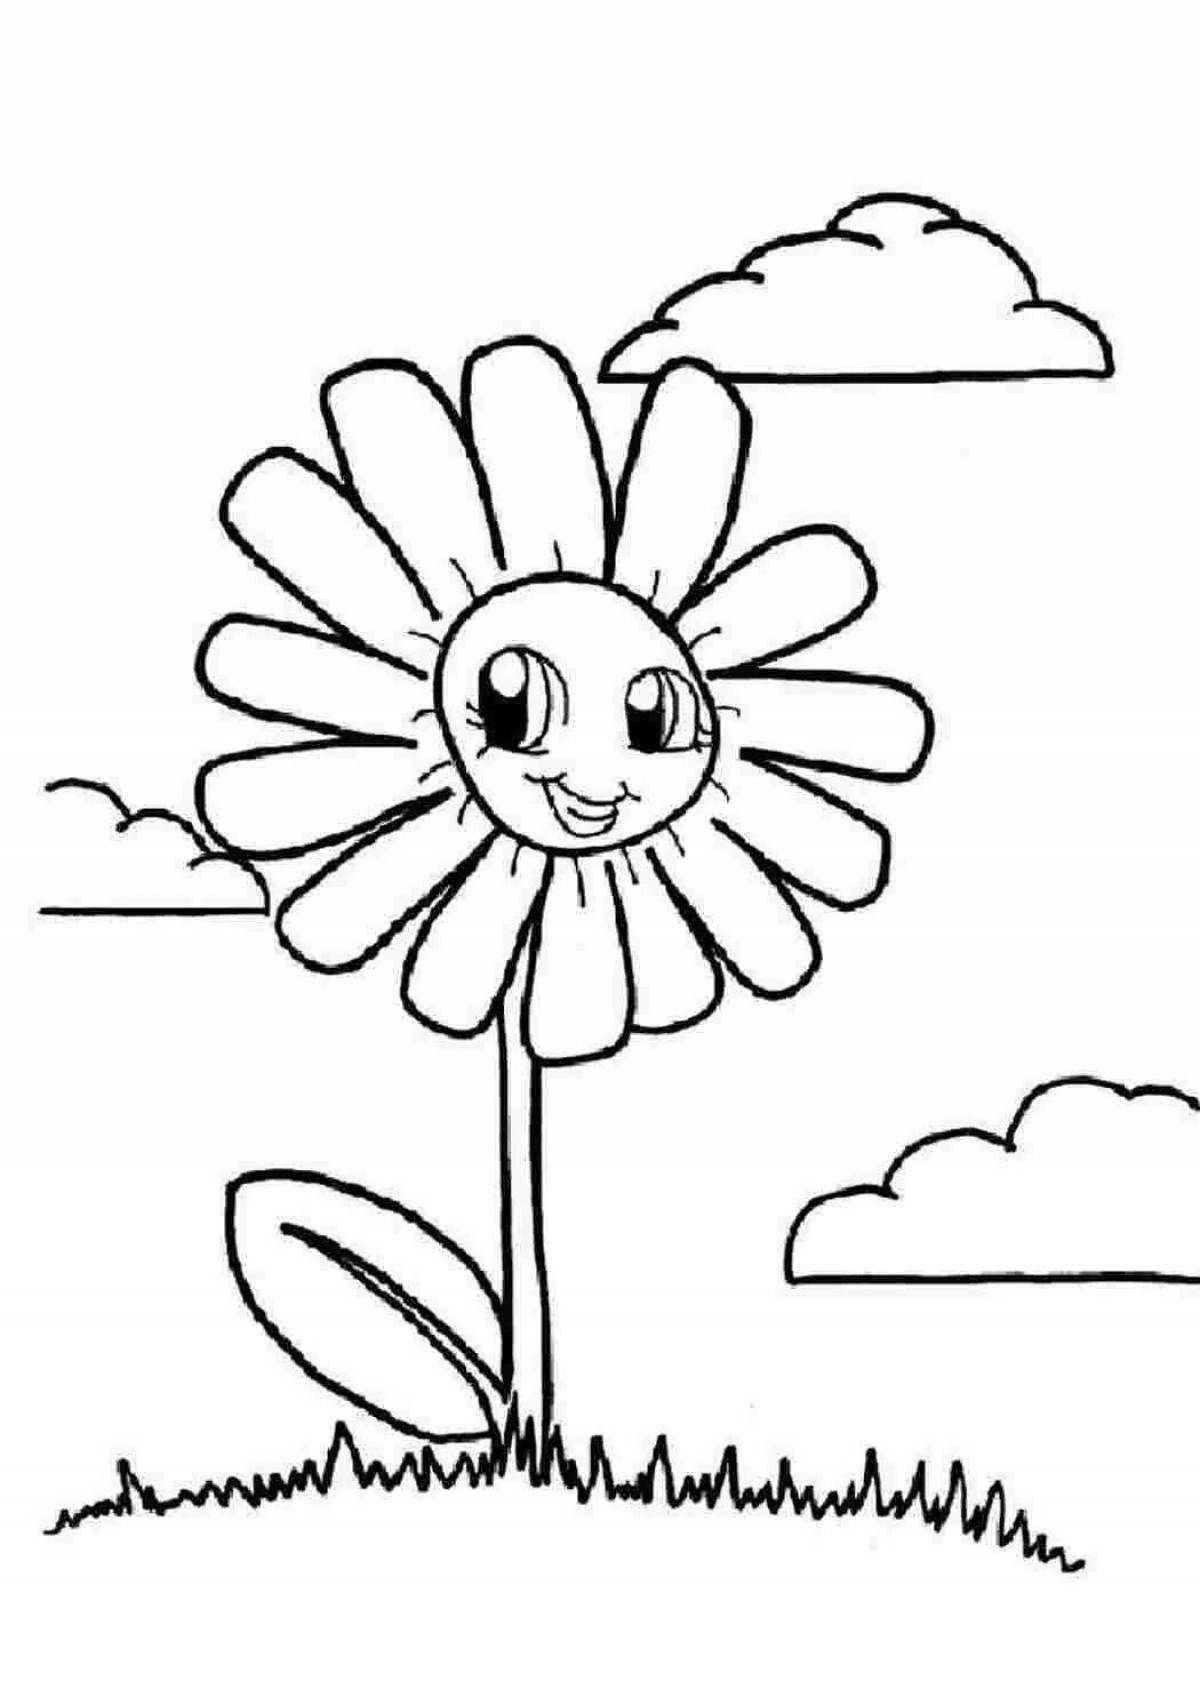 Sparkling Chamomile coloring book for preschoolers